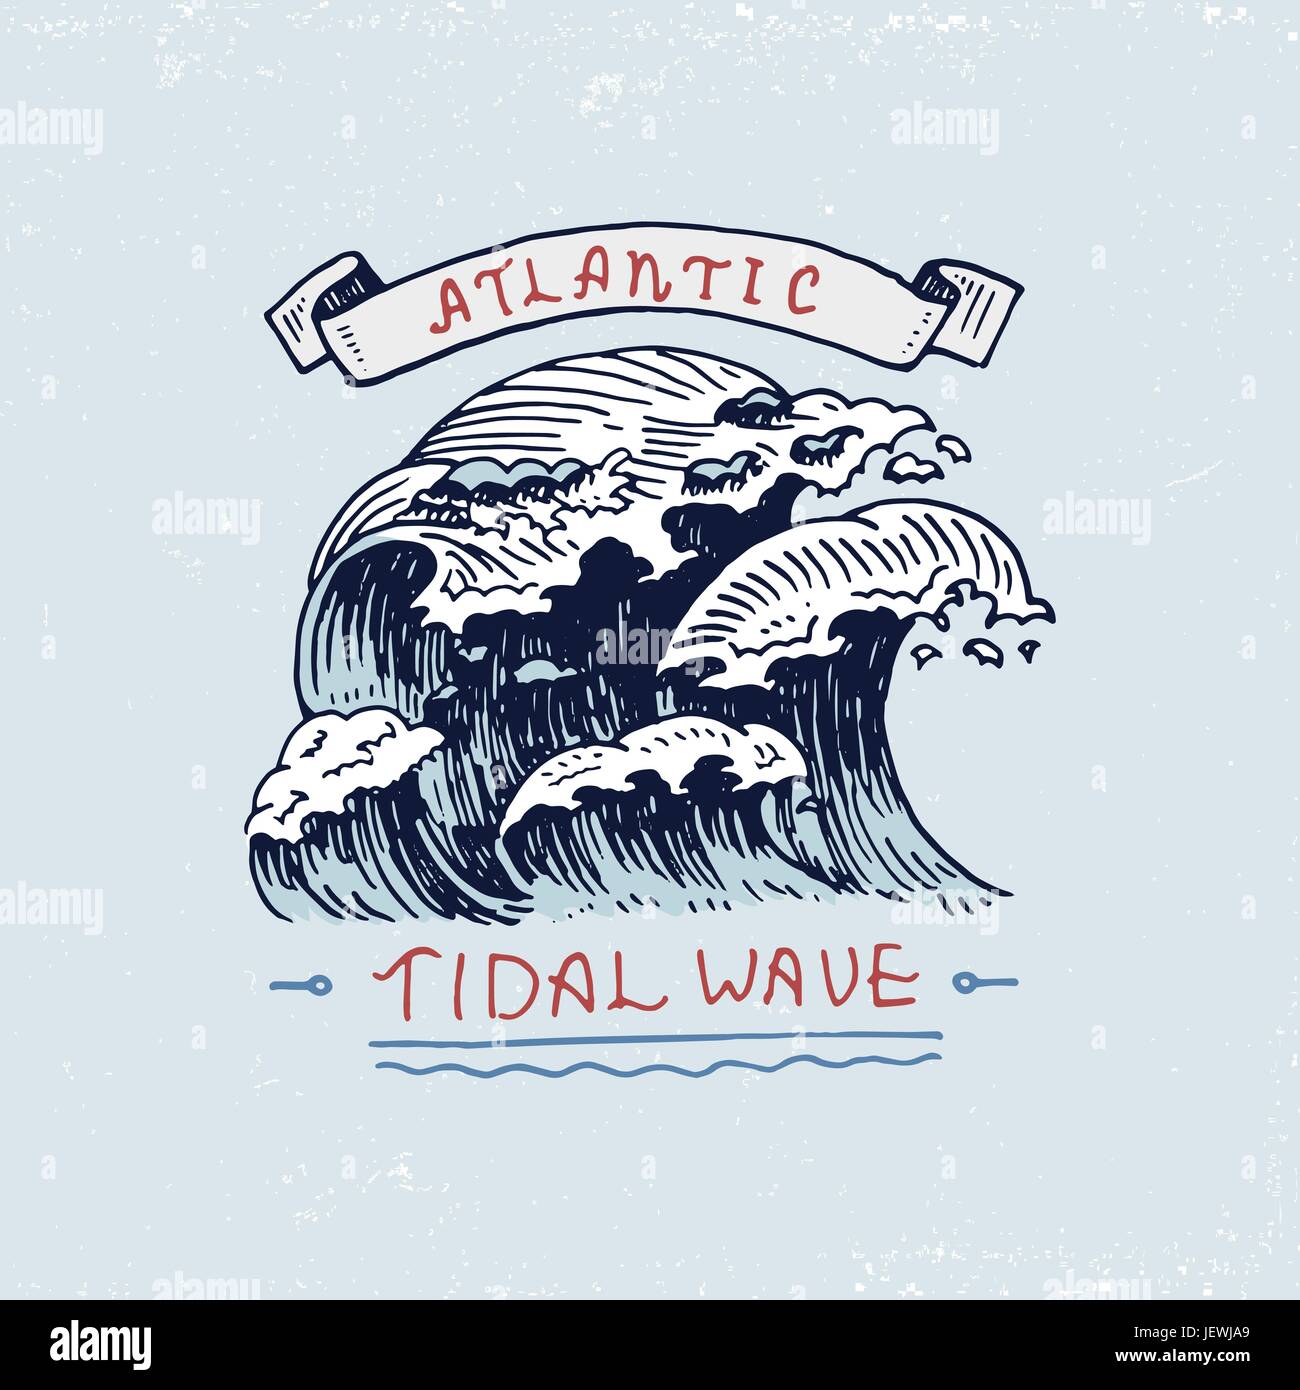 set of engraved vintage, hand drawn, old, labels or badges for atlantic tidal wave. Marine and nautical or sea, ocean emblems. Stock Vector